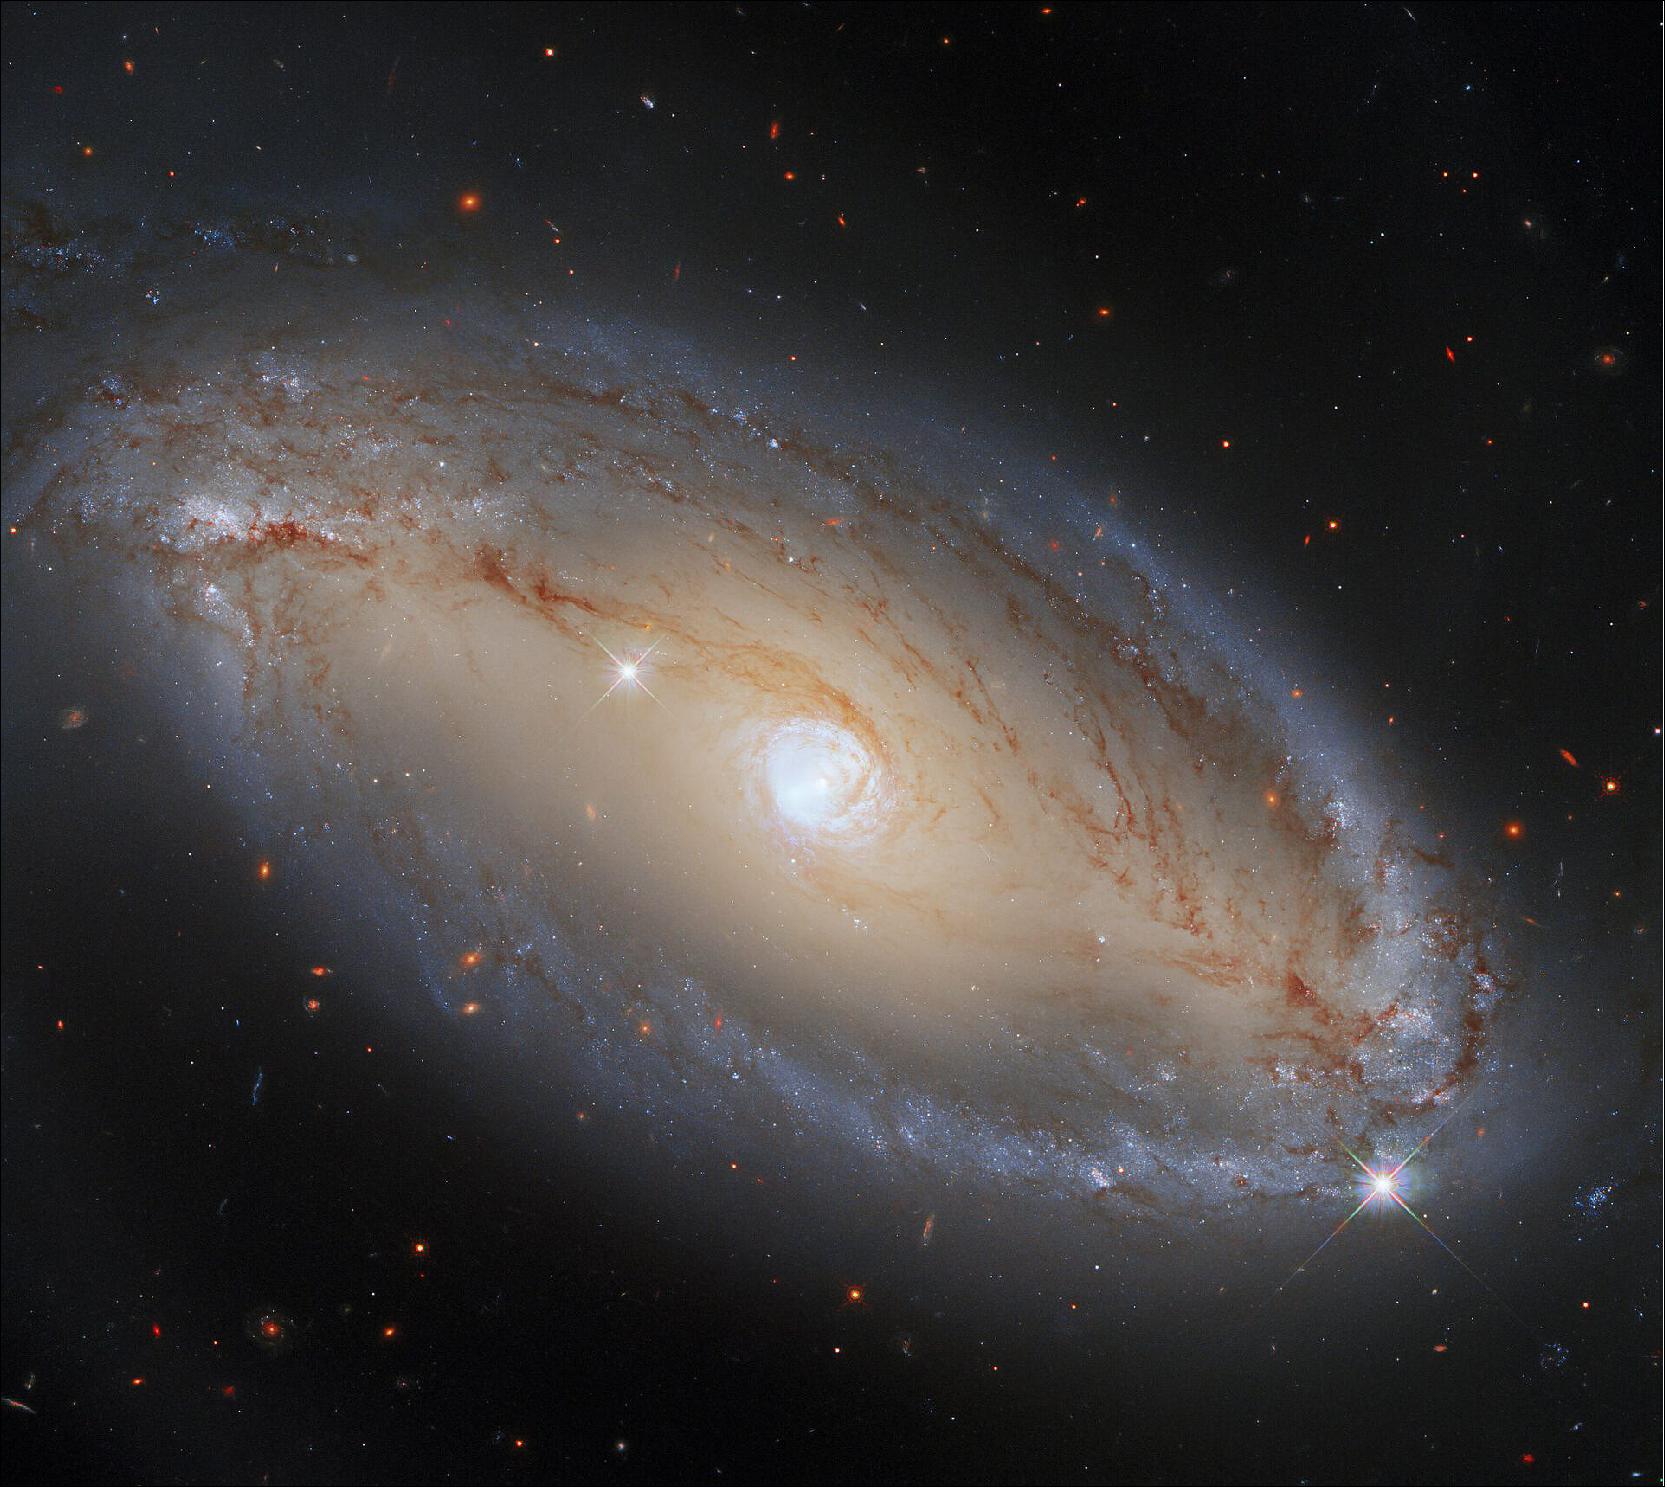 Figure 43: In this image, NGC 5728 appears to be an elegant, luminous, barred spiral galaxy. What this image does not show, however, is that NGC 5728 is also a monumentally energetic type of galaxy, known as a Seyfert galaxy. This extremely energetic class of galaxies are powered by their active cores, which are known as active galactic nuclei (AGNs). There are many different types of AGNs, and only some of them power Seyfert galaxies. NGC 5728, like all Seyfert galaxies, is distinguished from other galaxies with AGNs because the galaxy itself can be seen clearly. Other types of AGNs, such as quasars, emit so much radiation that it is almost impossible to observe the galaxy that houses them. As this image shows, NGC 5728 is clearly observable, and at optical and infrared wavelengths it looks quite normal. It is fascinating to know that the galaxy’s center is emitting vast amounts of light in parts of the electromagnetic spectrum that WFC3 just isn’t sensitive to! Just to complicate things, the AGN at NGC 5728’s core might actually be emitting some visible and infrared light — but it may be blocked by the dust surrounding the galaxy’s core (image credit: ESA/Hubble, A. Riess et al., J. Greene; CC BY 4.0)